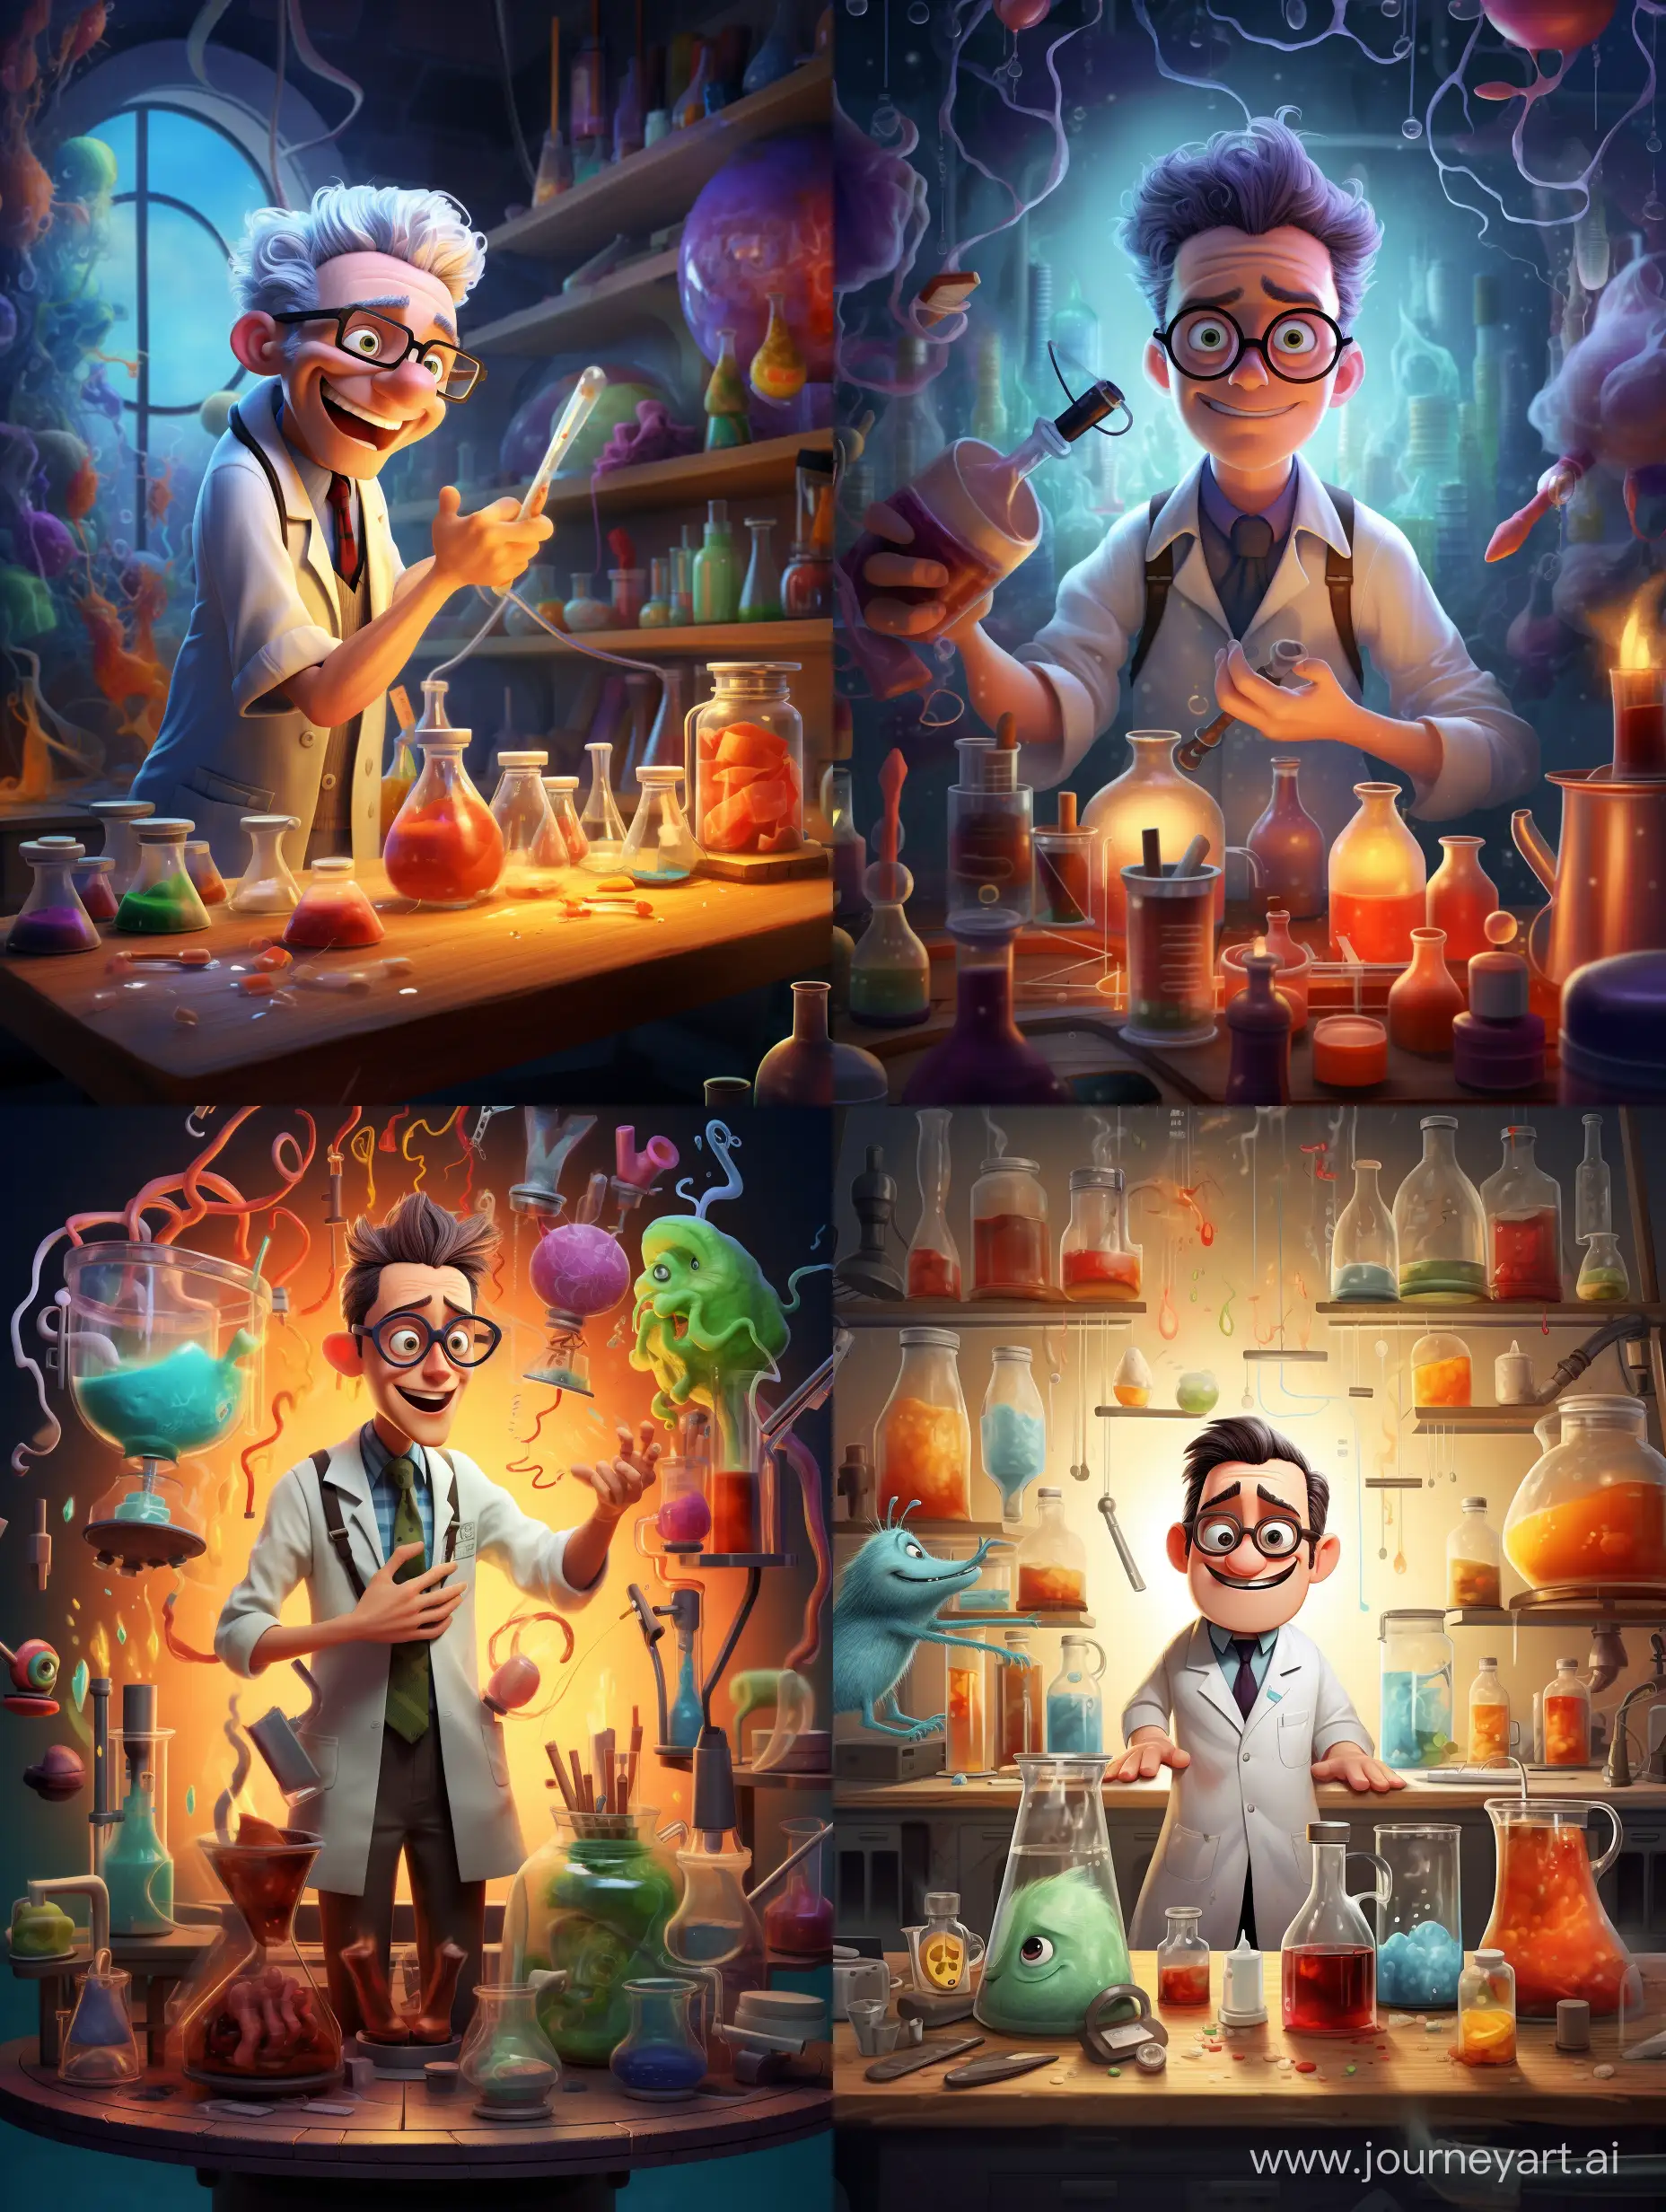 Scientist-Mixing-Chemicals-in-Pixar-Style